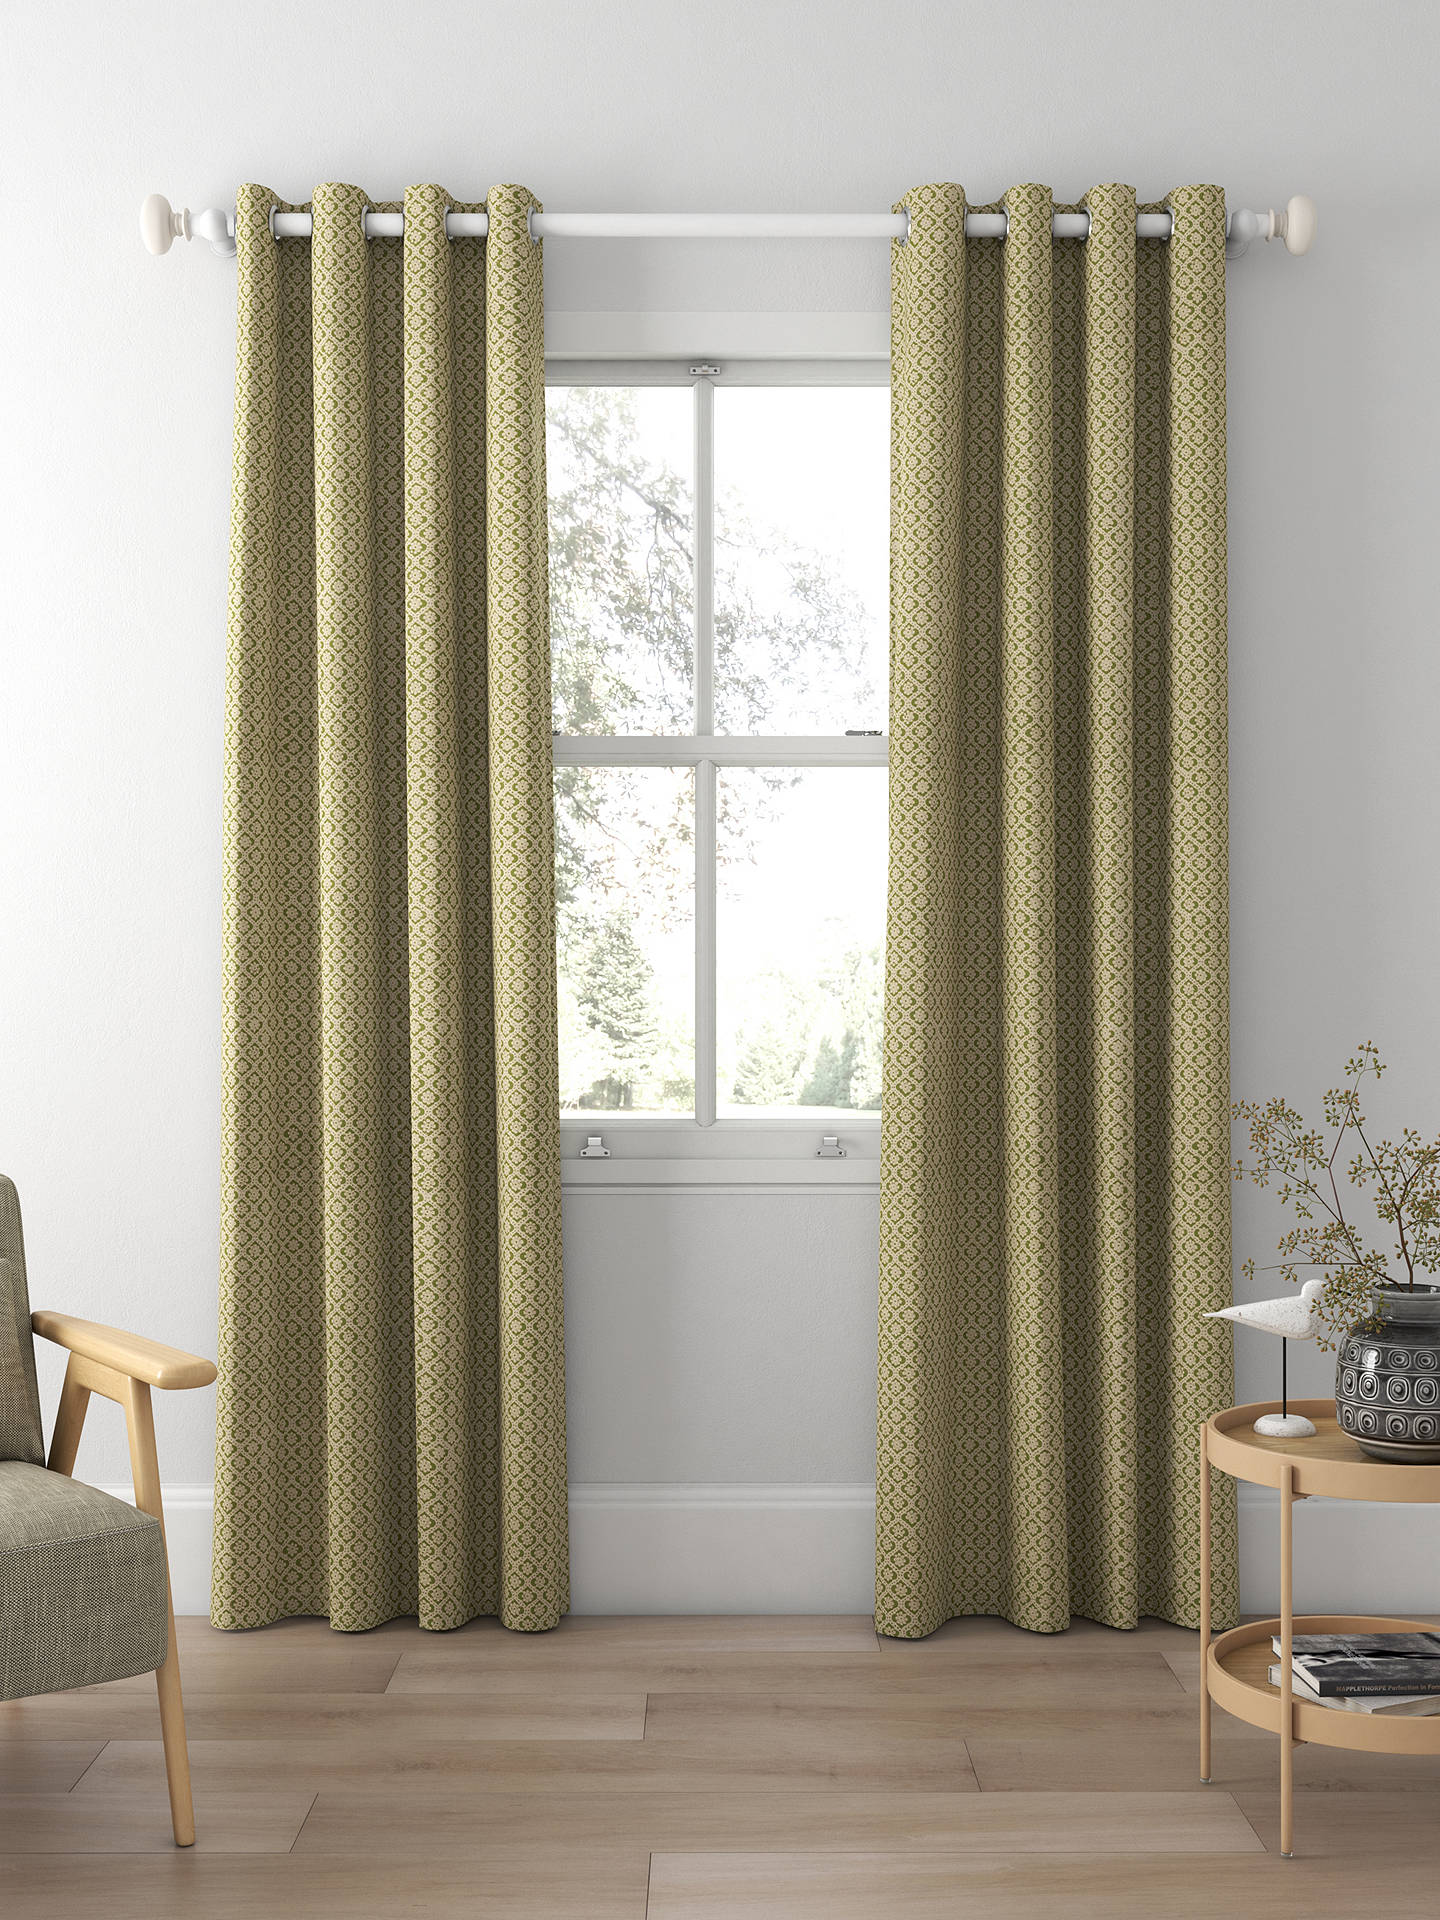 GP & J Baker Indus Flower Made to Measure Curtains, Green